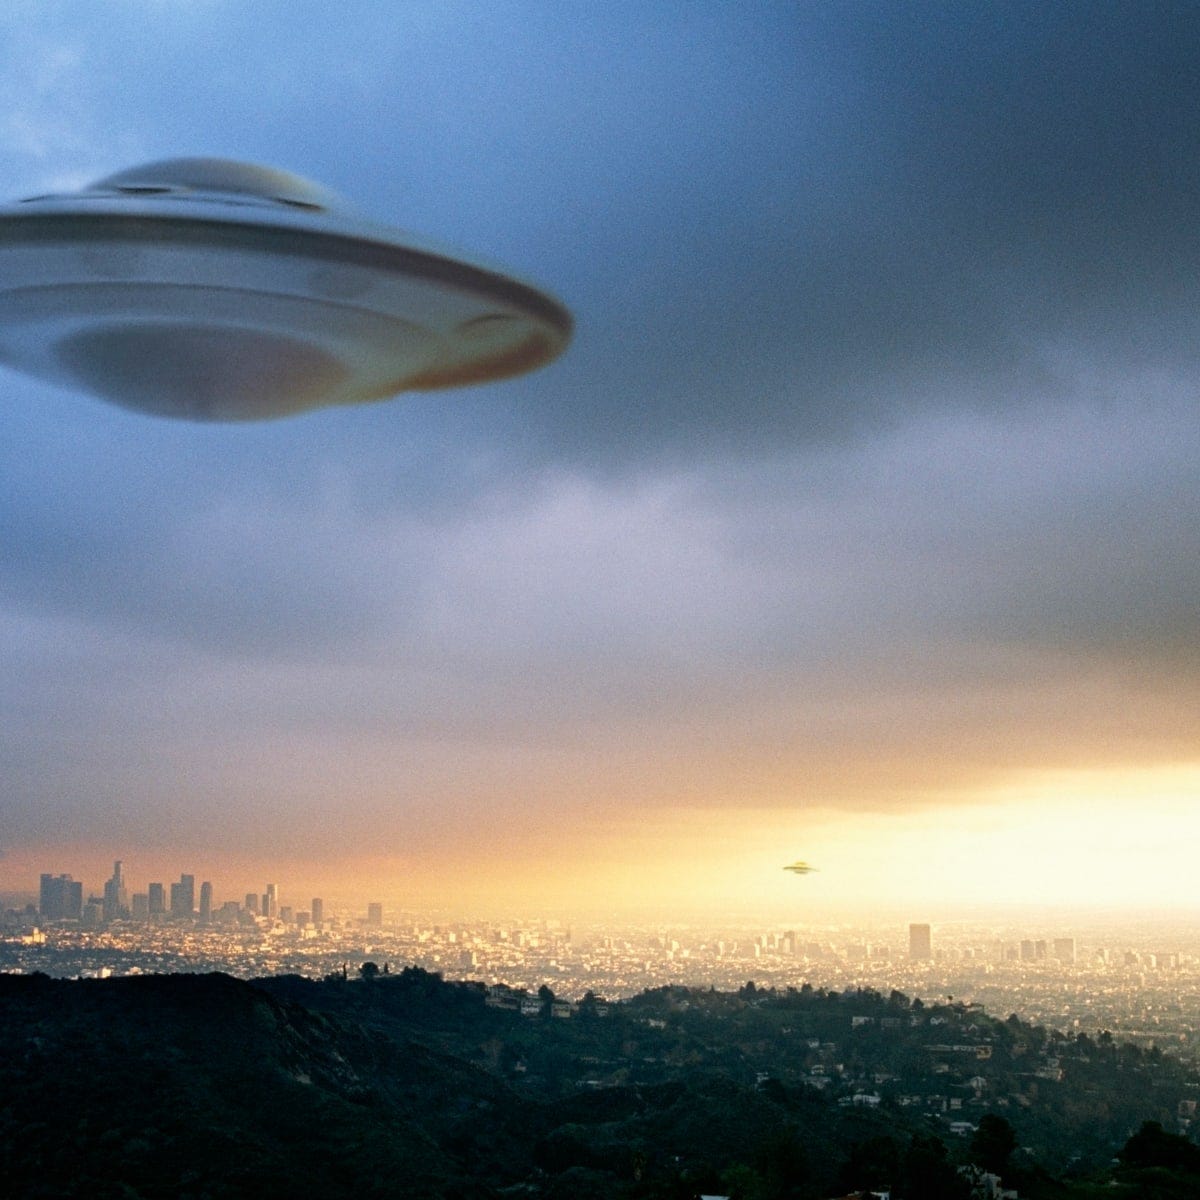 A journalist gathers credible UFO evidence.